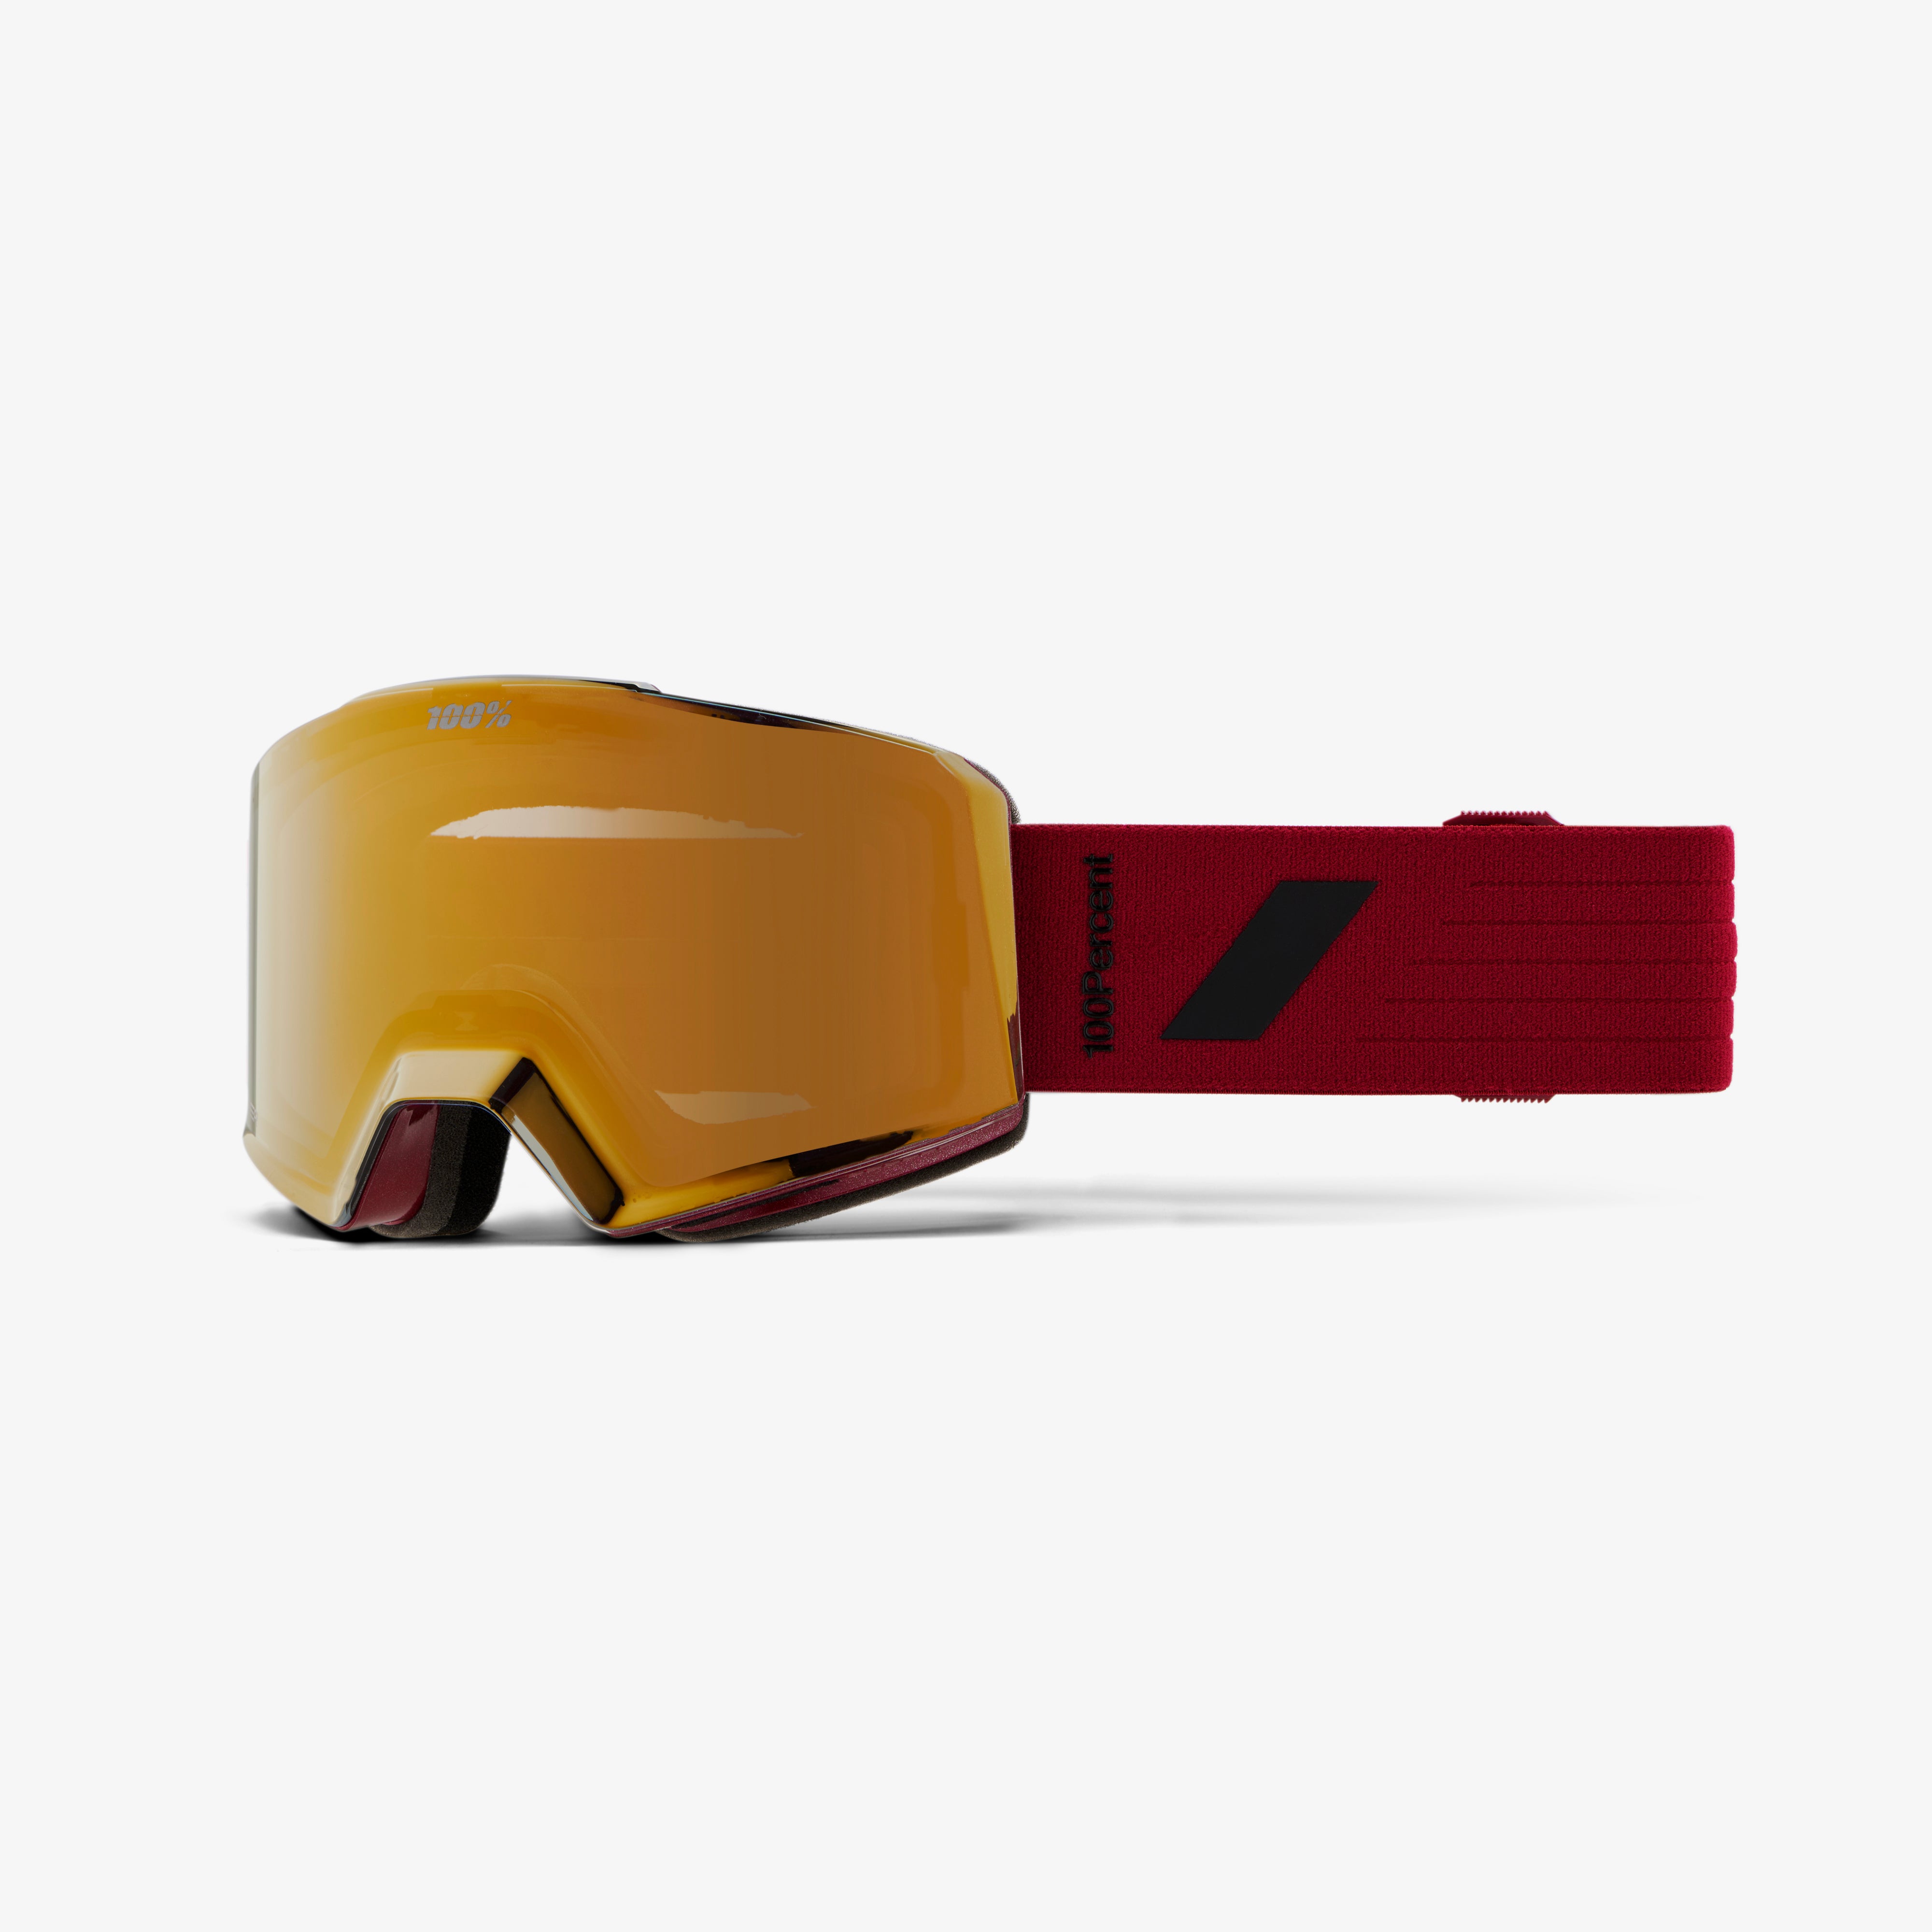 NORG HiPER Goggle Bison - Secondary